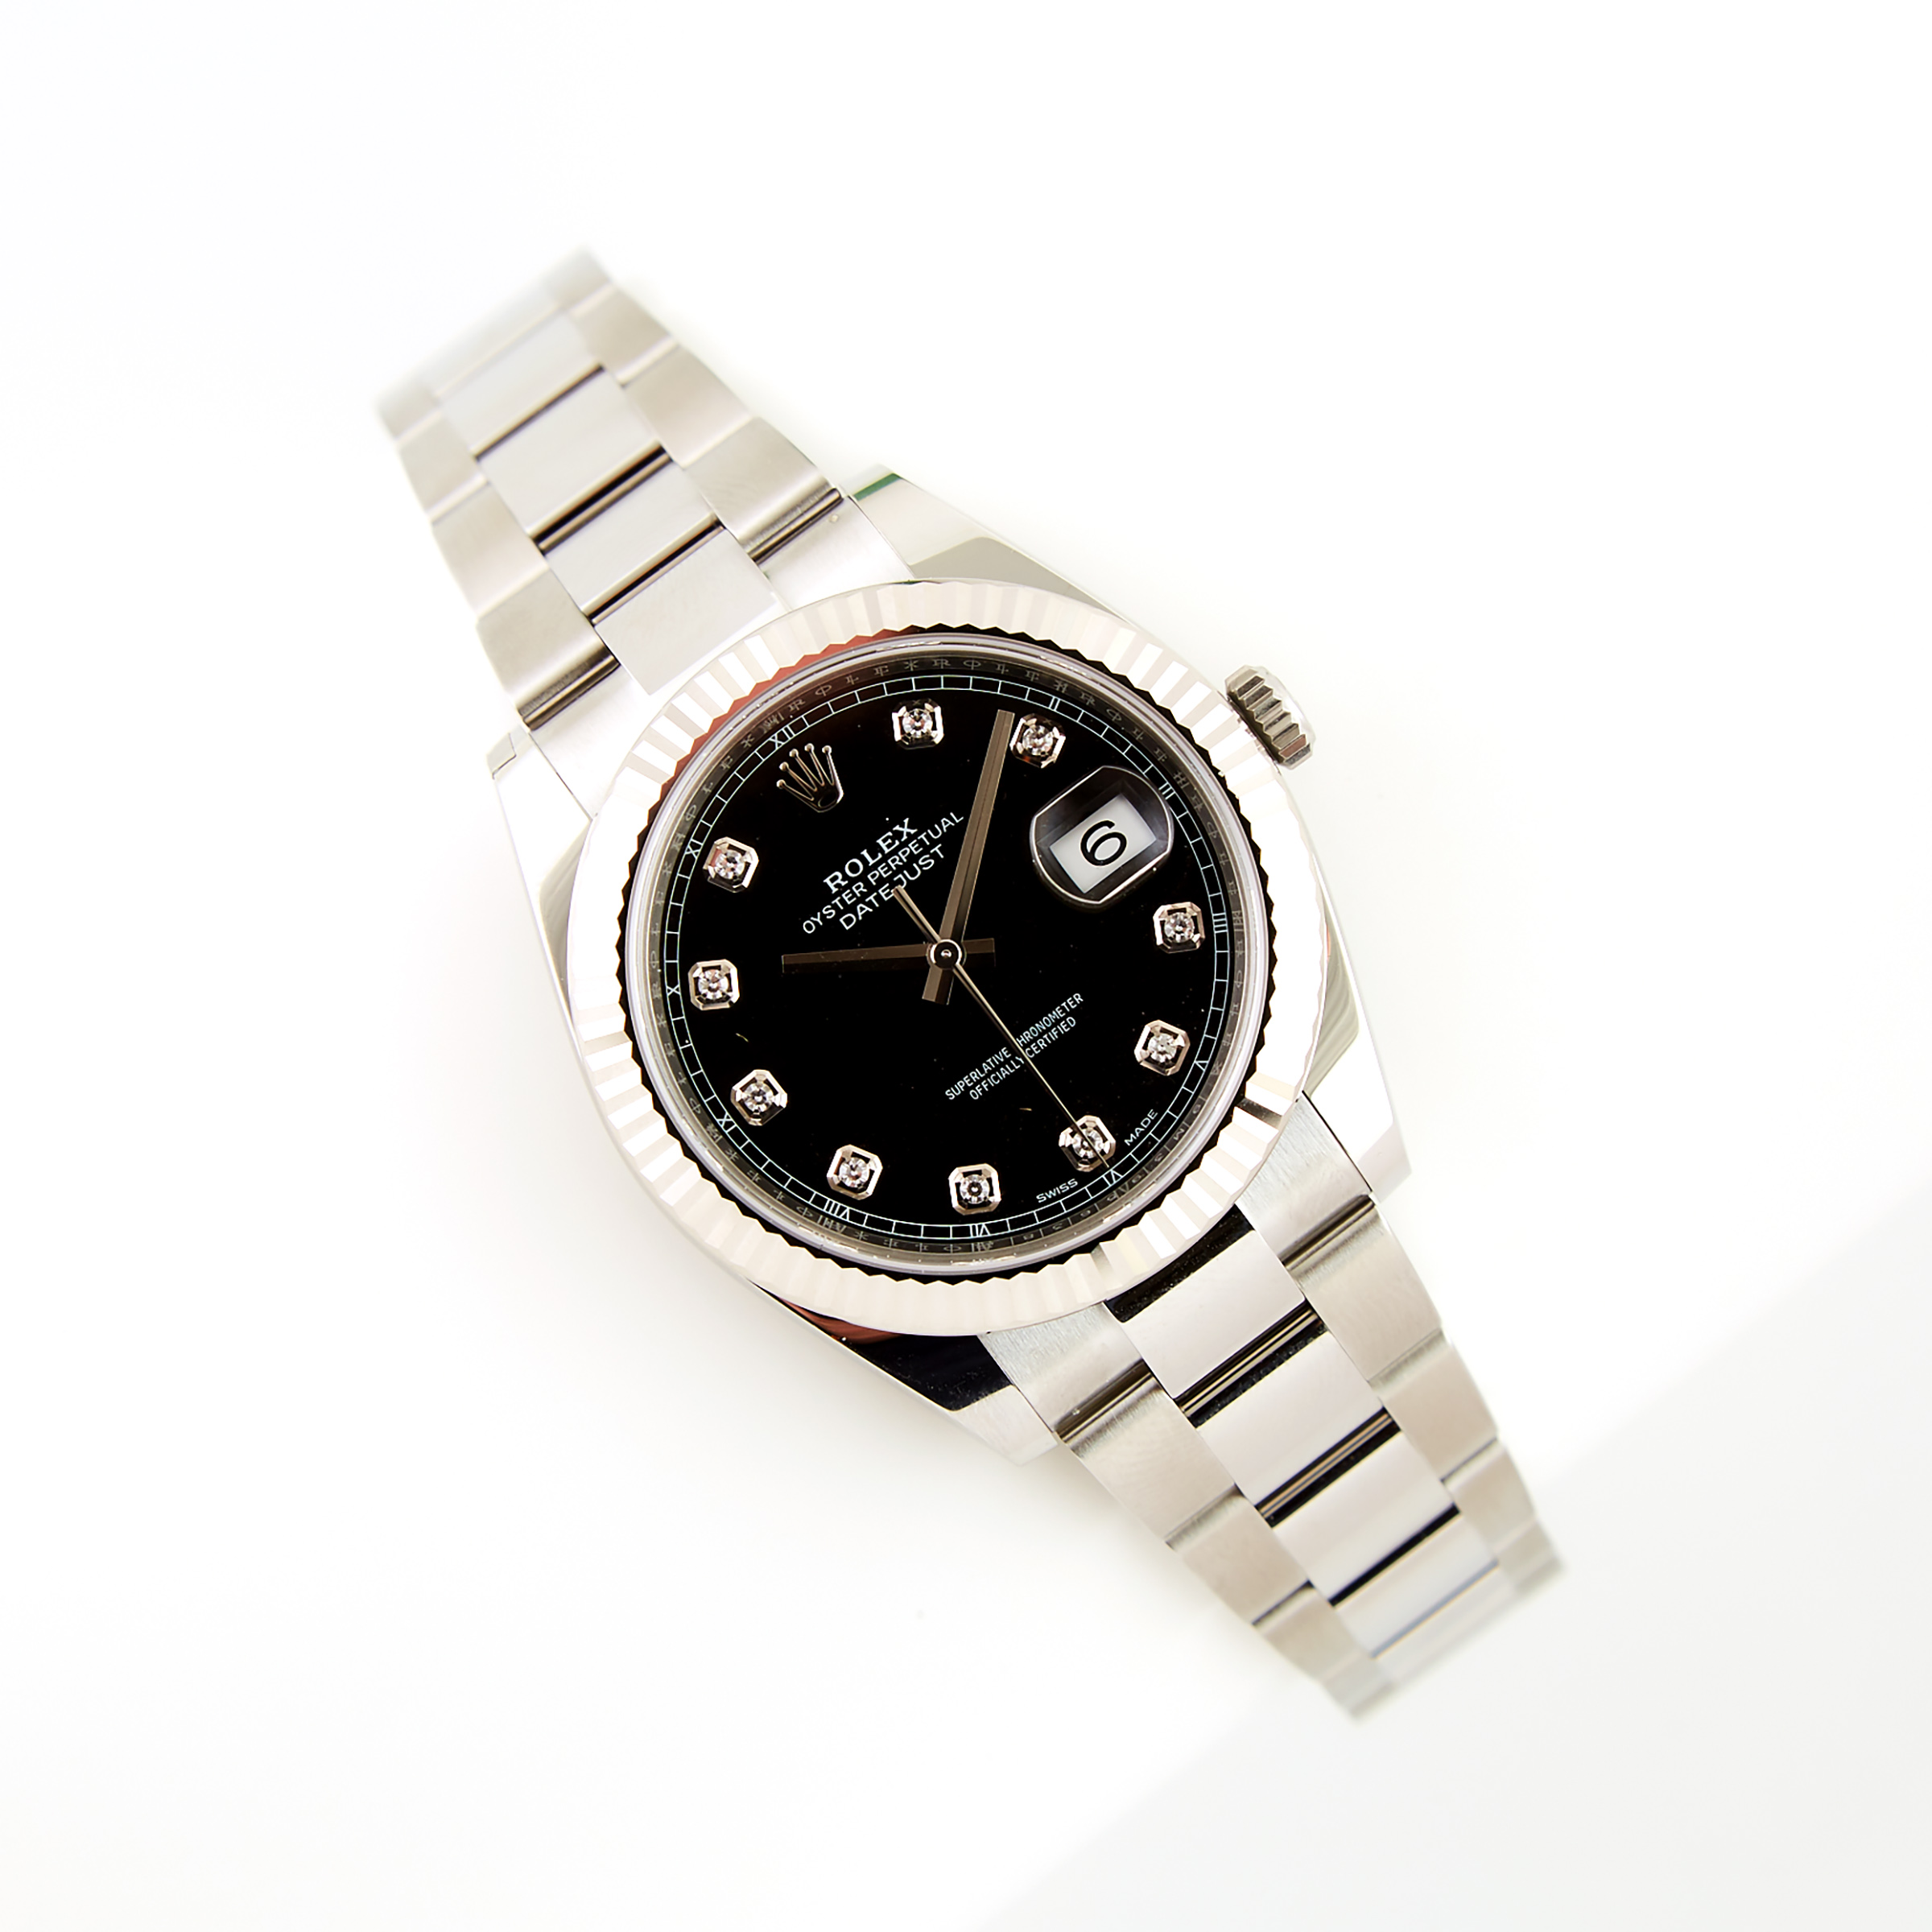 Rolex Oyster Perpetual Datejust Wristwatch